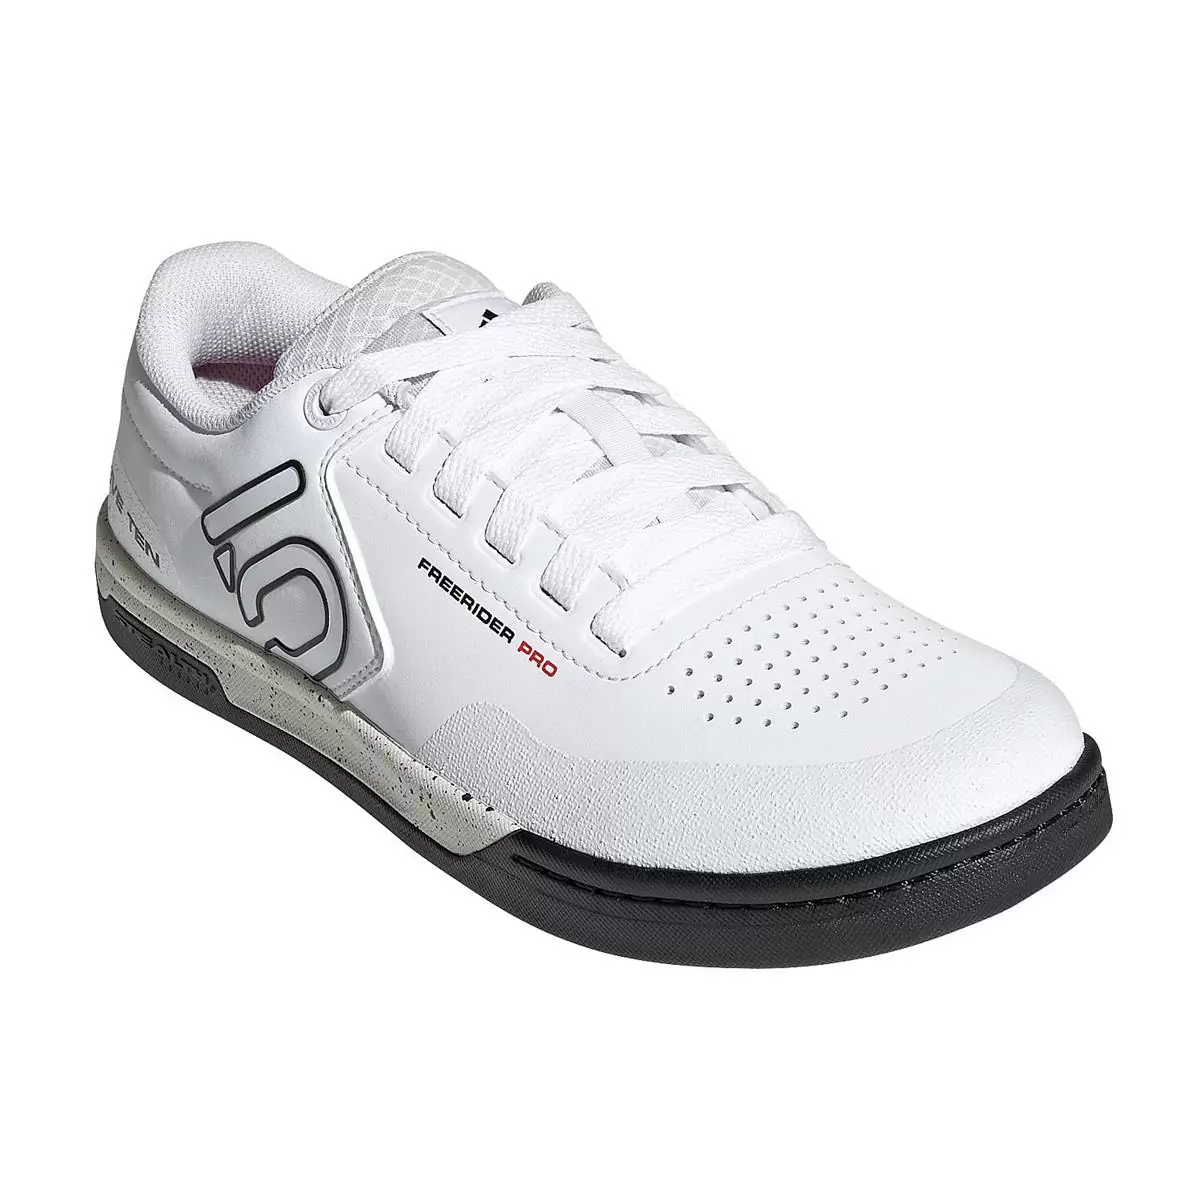 Chaussures Plates VTT Freerider Pro KYX44 Blanc Taille 42,5 #1